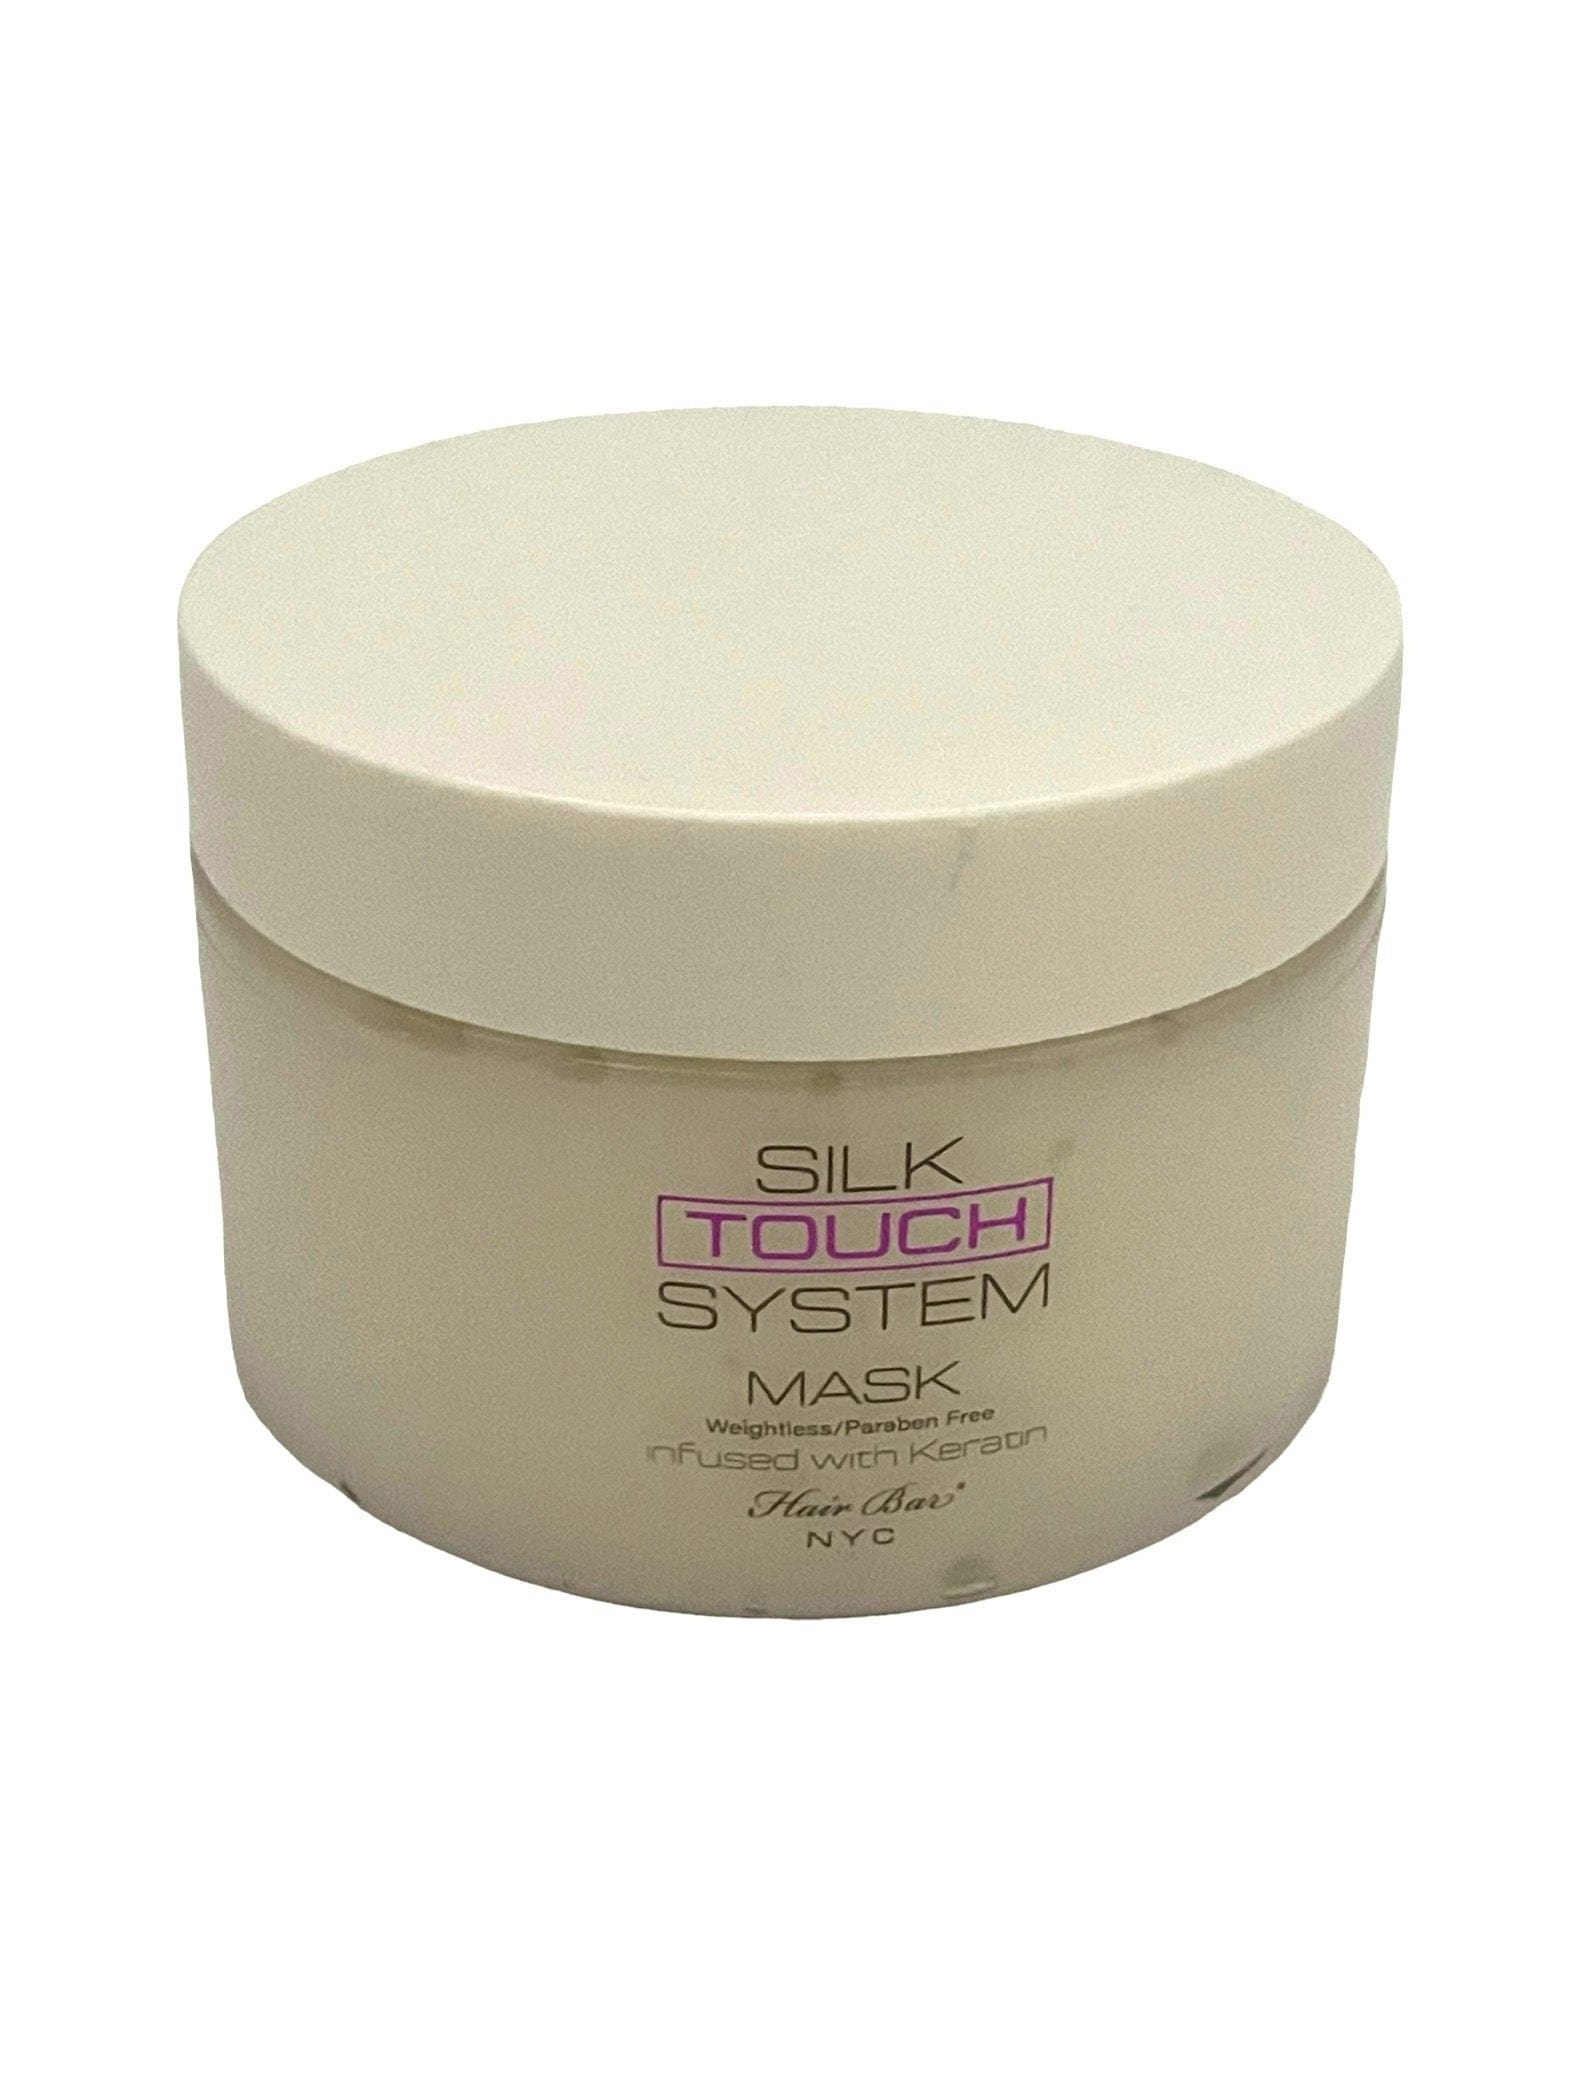 Hair Mask Silk Touch System Mask 10.14 oz Conditioners